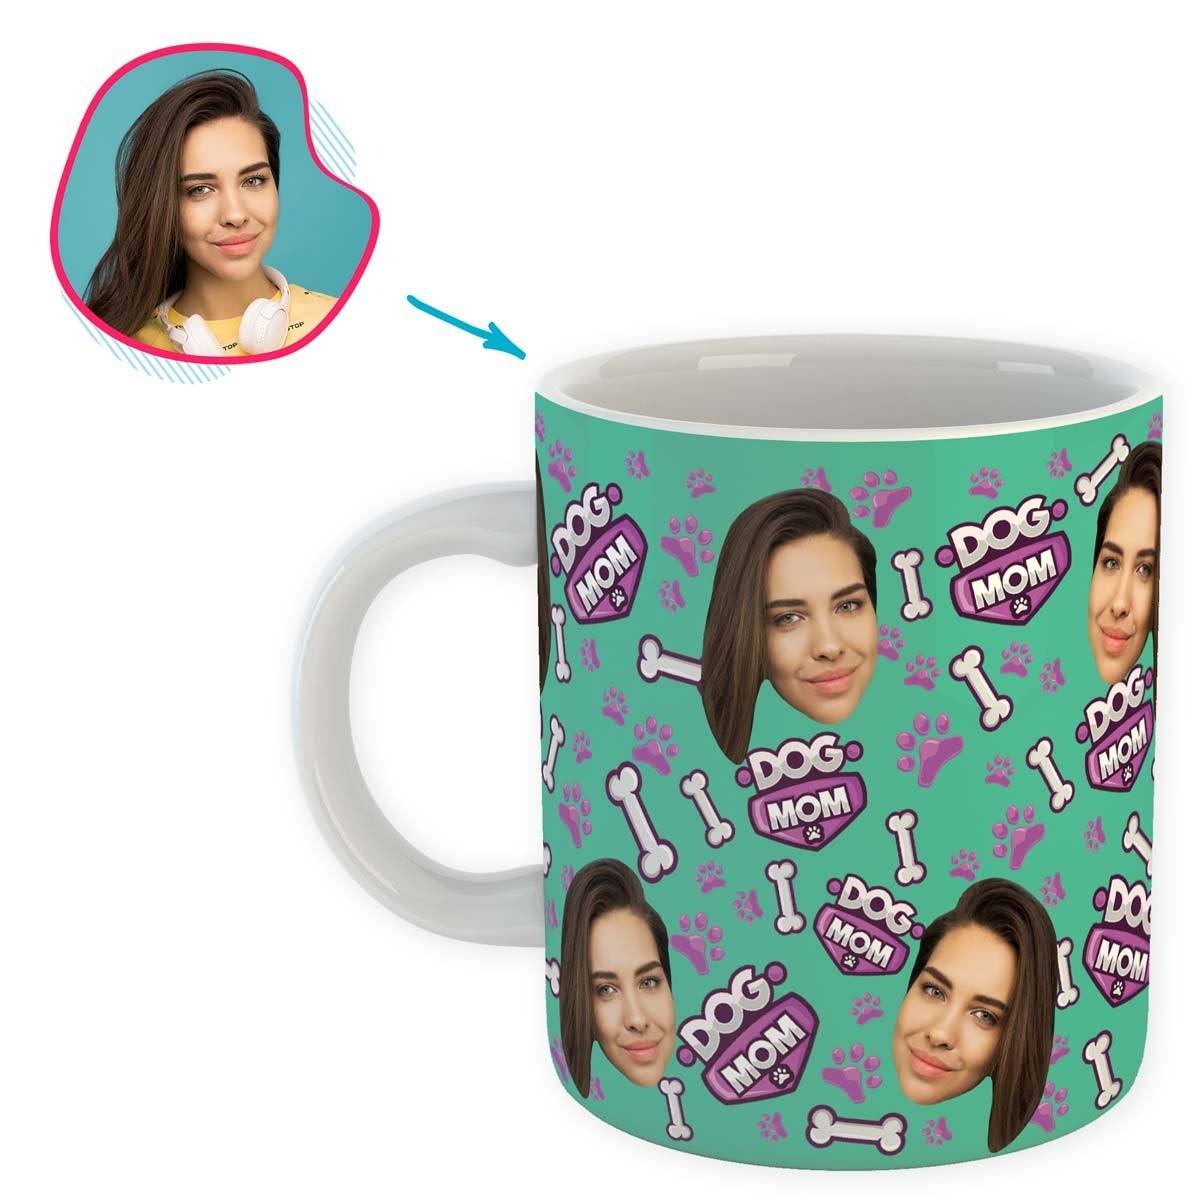 mint Dog Mom mug personalized with photo of face printed on it